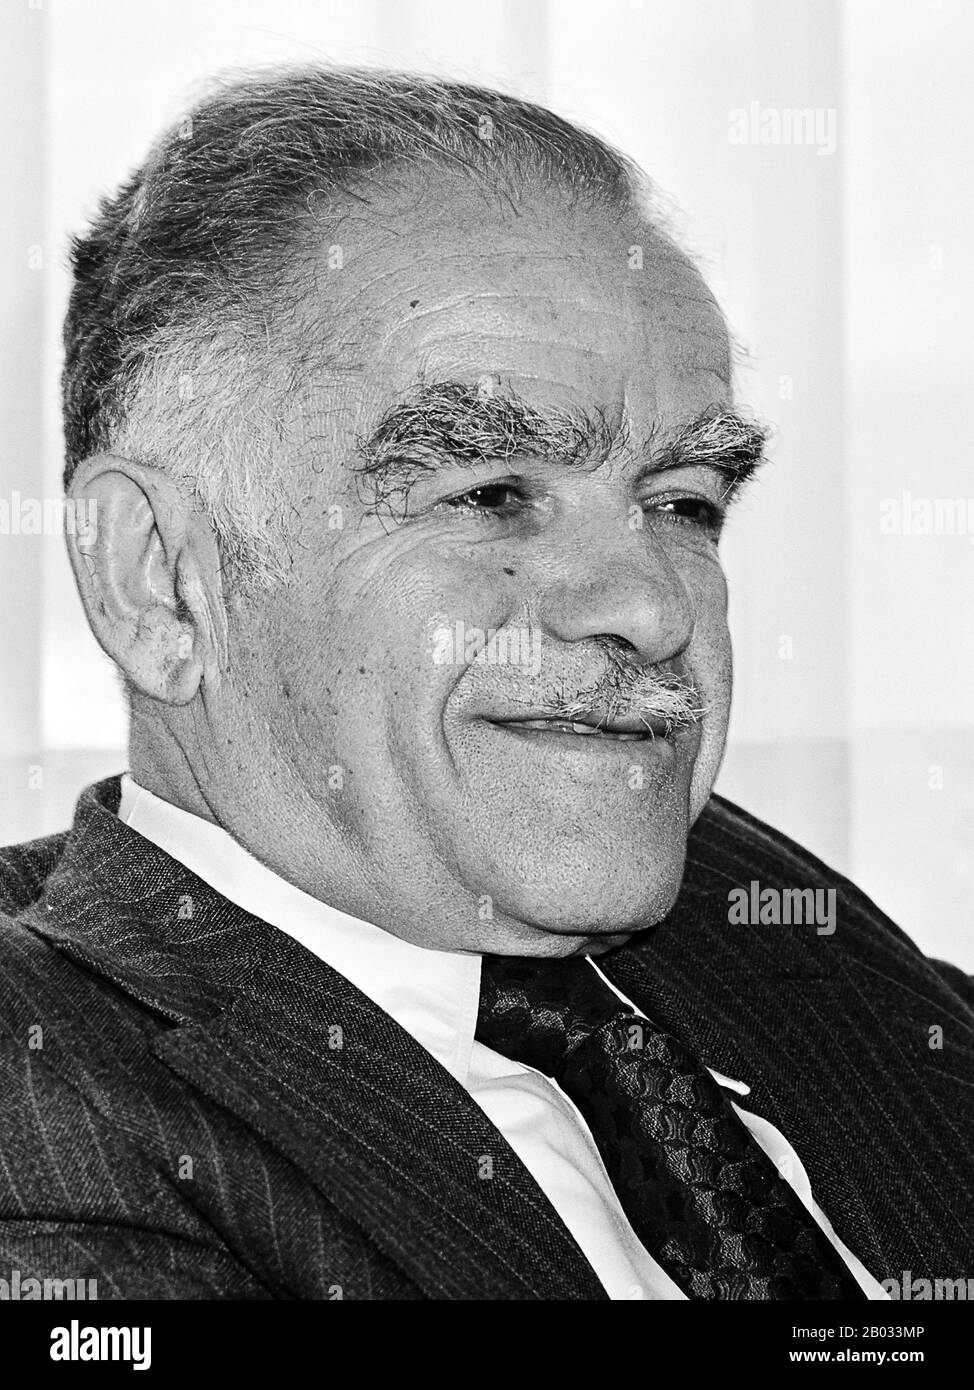 Yitzhak Shamir (born Yitzhak Yezernitsky; October 22, 1915 – June 30, 2012) was an Israeli politician and the seventh Prime Minister of Israel, serving two terms, 1983–84 and 1986–1992. Before the establishment of the State of Israel, Shamir was a leader of the Zionist terrorist group Lehi (the Stern Gang).  As a leader of the Stern Gang, Shamir both authorised and helped organise the assassination of  the United Nations Mediator in Palestine Swedish Count Folke Bernadotte in September, 1948.  After the establishment of the State of Israel he served in the Mossad between 1955 and 1965, a Kness Stock Photo